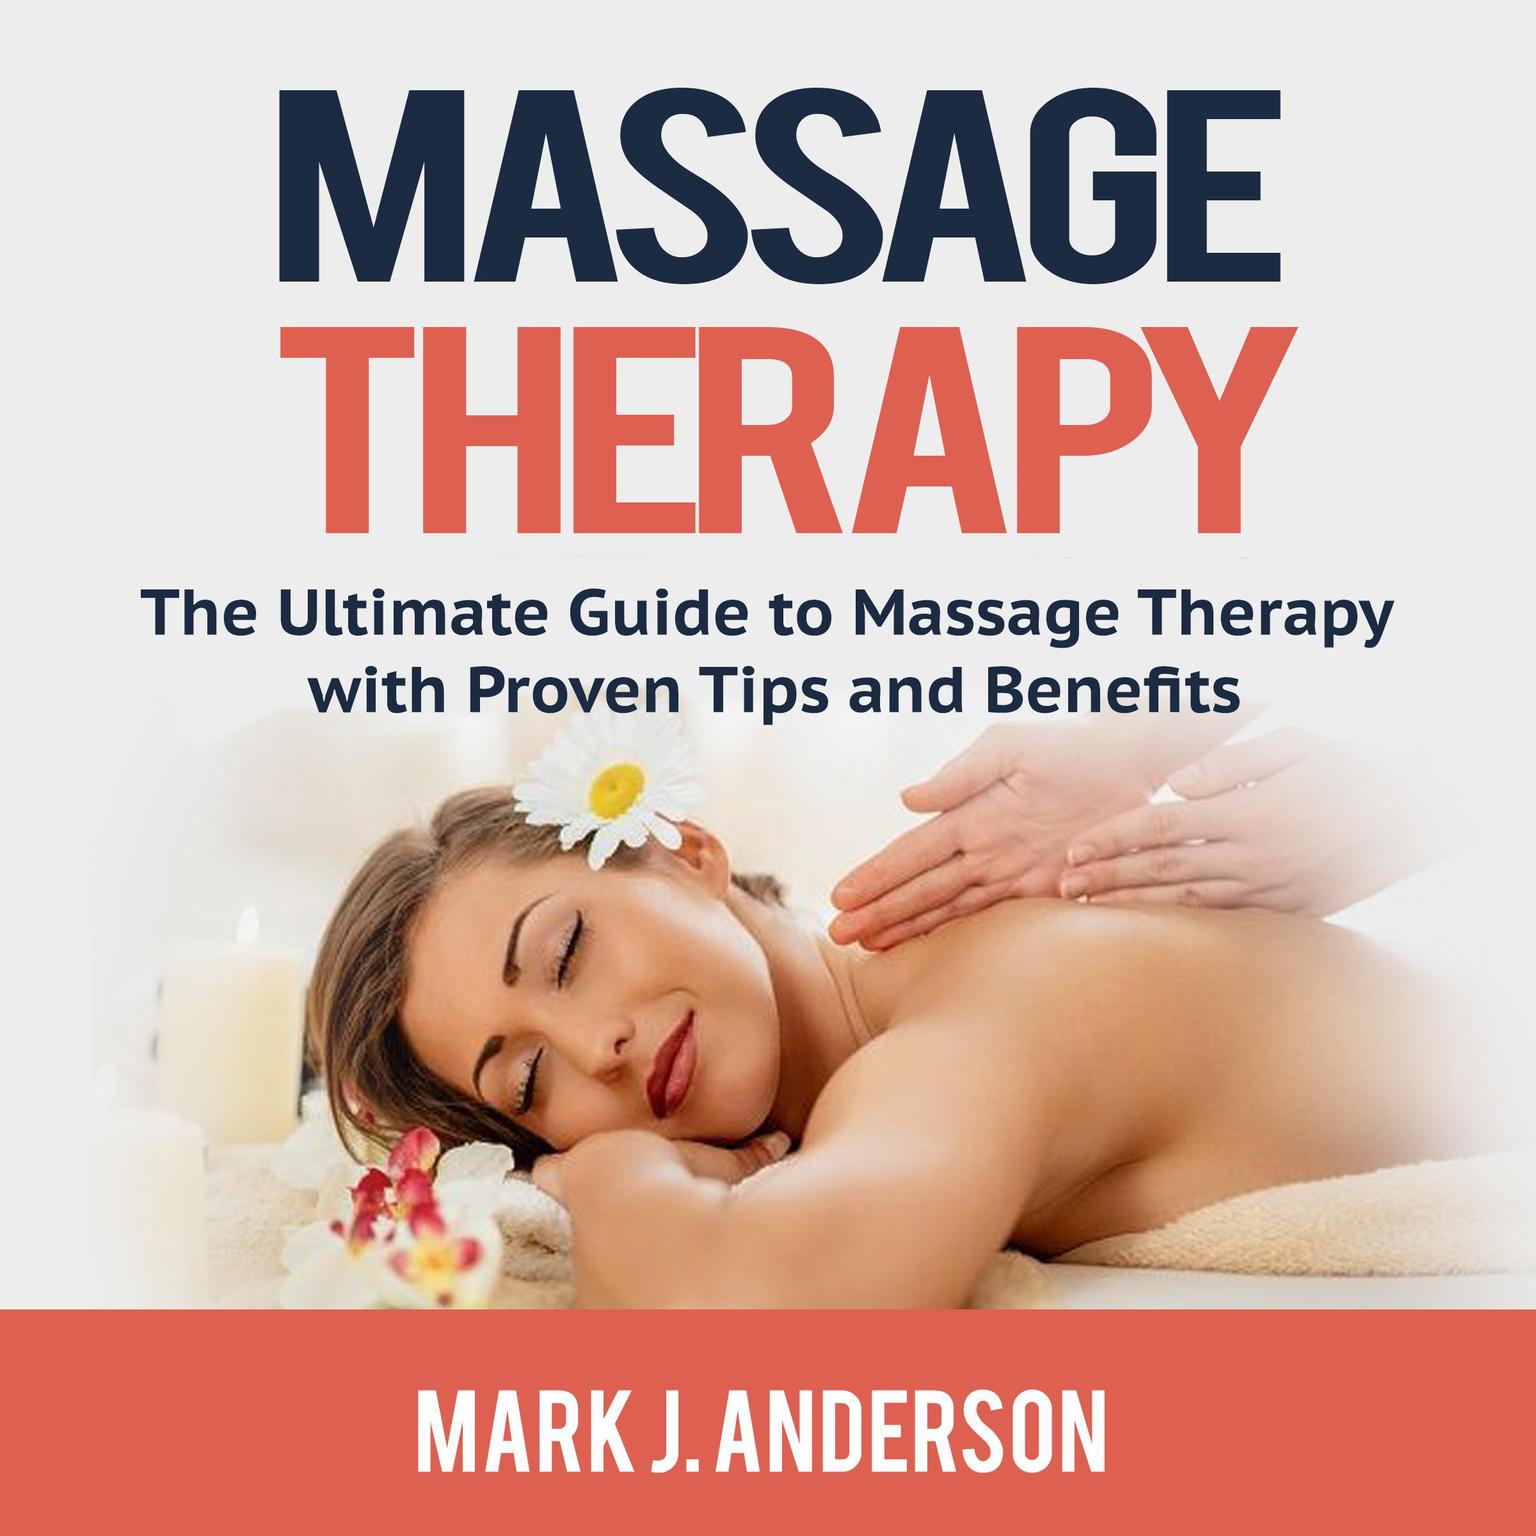 Massage Therapy: The Ultimate Guide to Massage Therapy with Proven Tips and Benefits: The Ultimate Guide to Massage Therapy with Proven Tips and Benefits Audiobook, by Mark J. Anderson